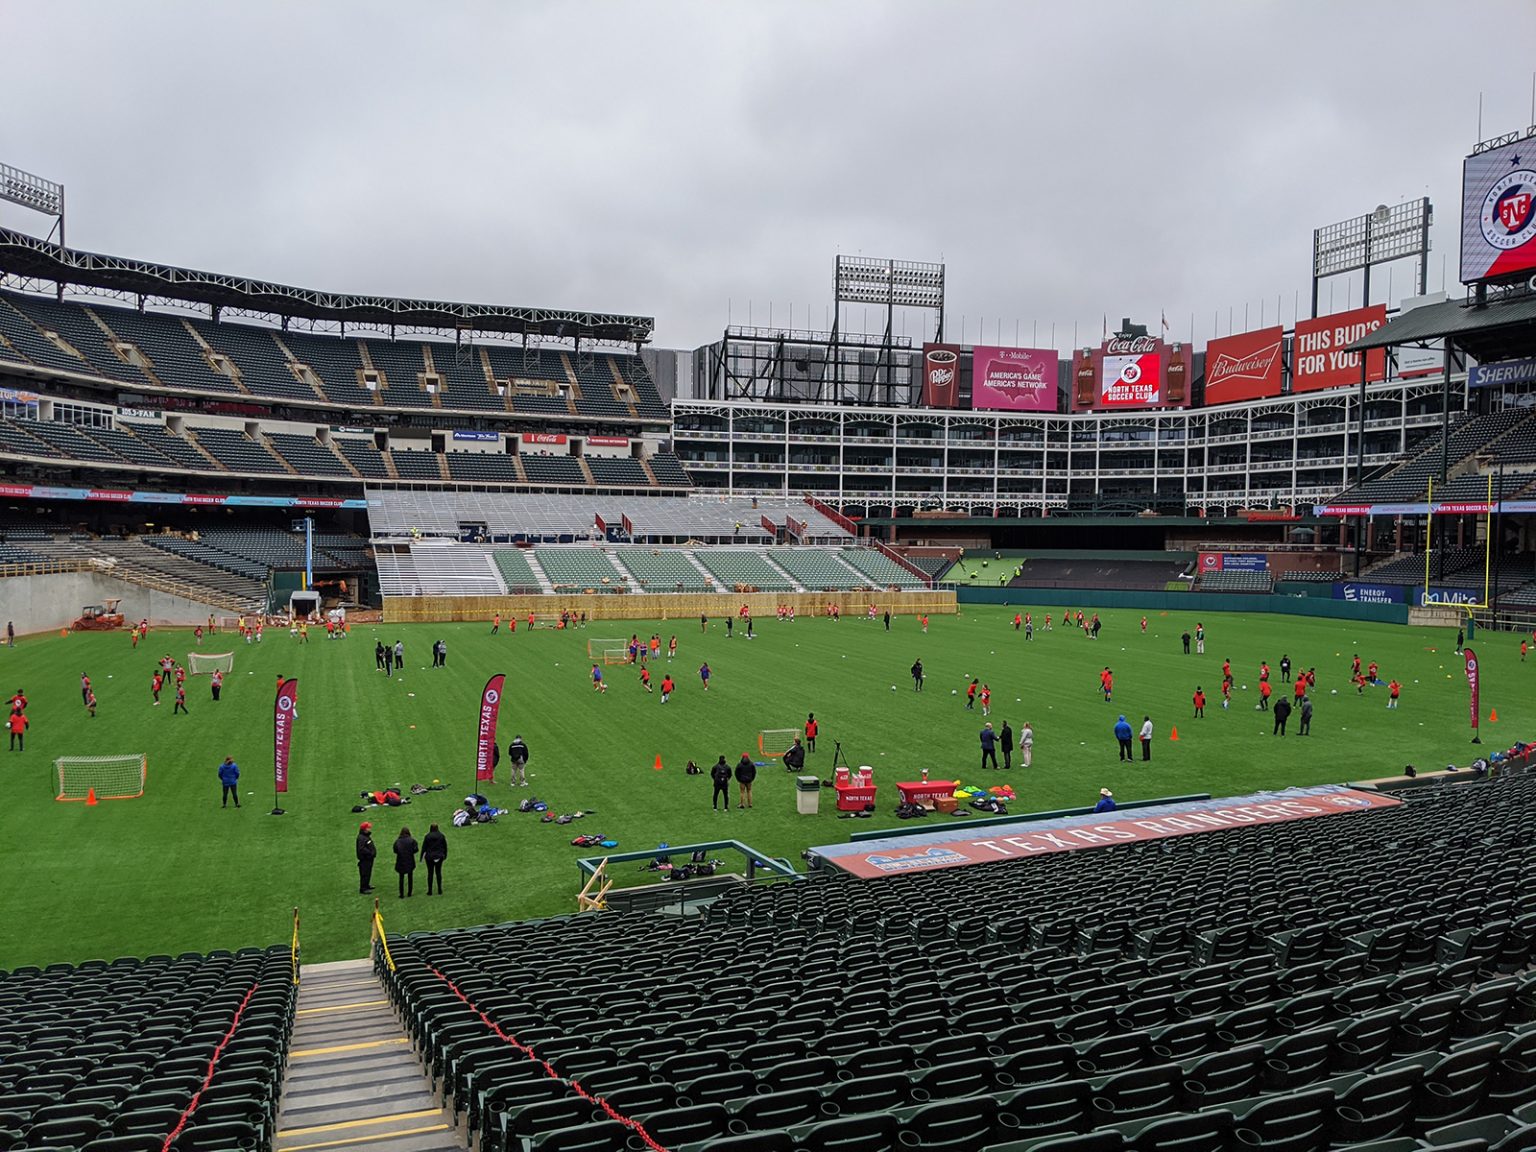 A sneak peek at Globe Life Park's soccer set up for North Texas SC